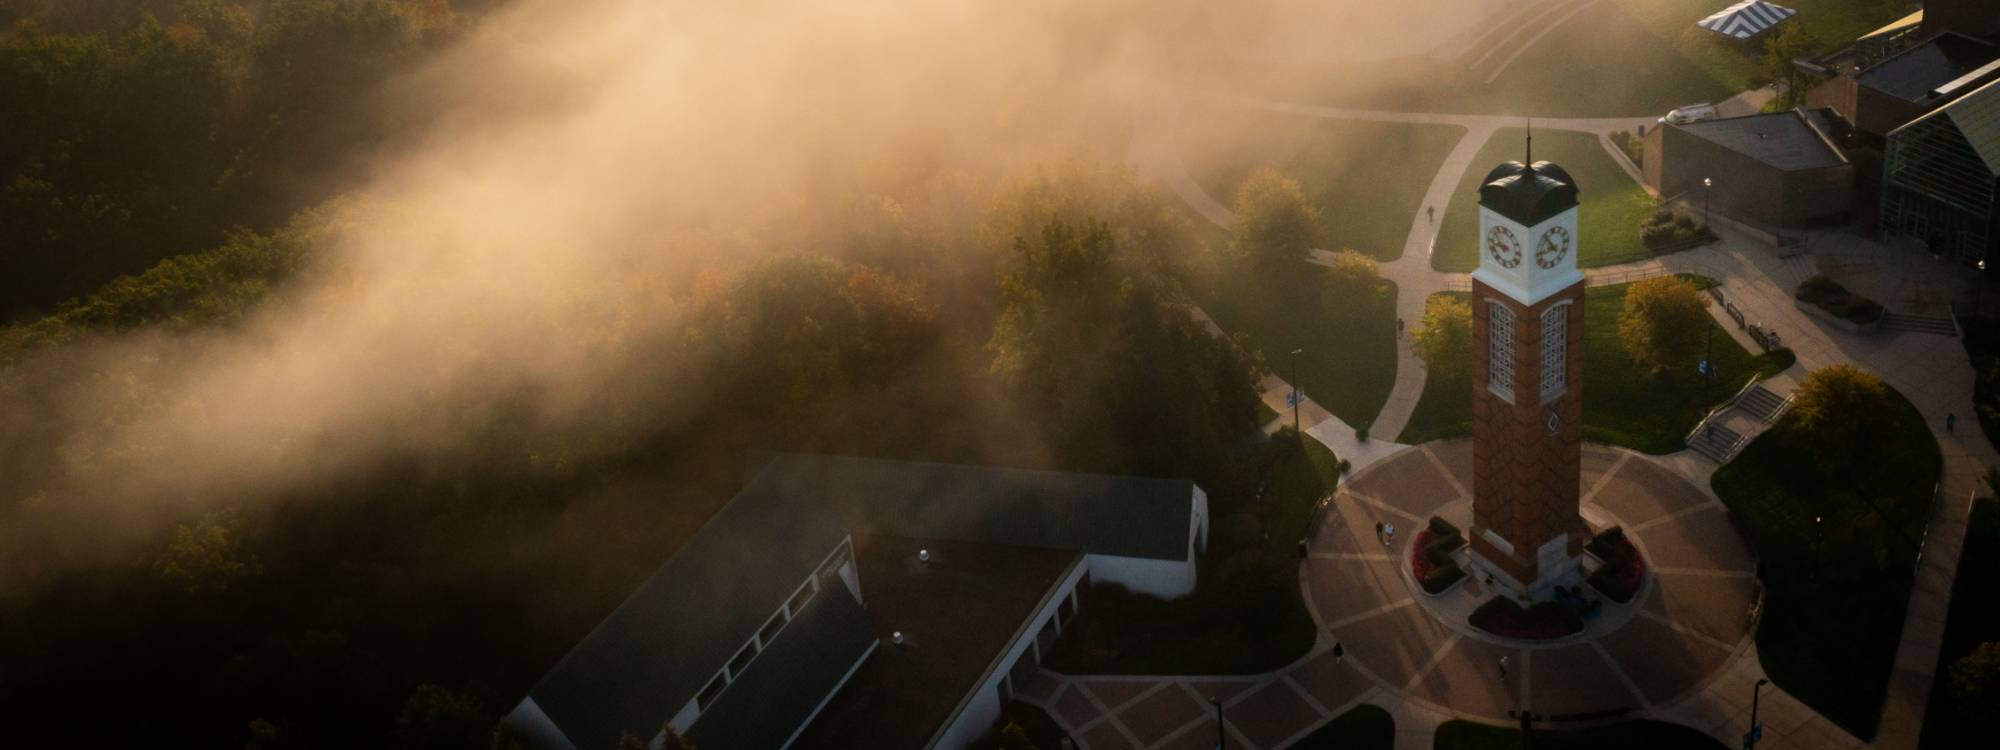 An aerial photo of the Allendale campus shows the clock tower and Cook DeWitt Center as fog rises above the ravines.